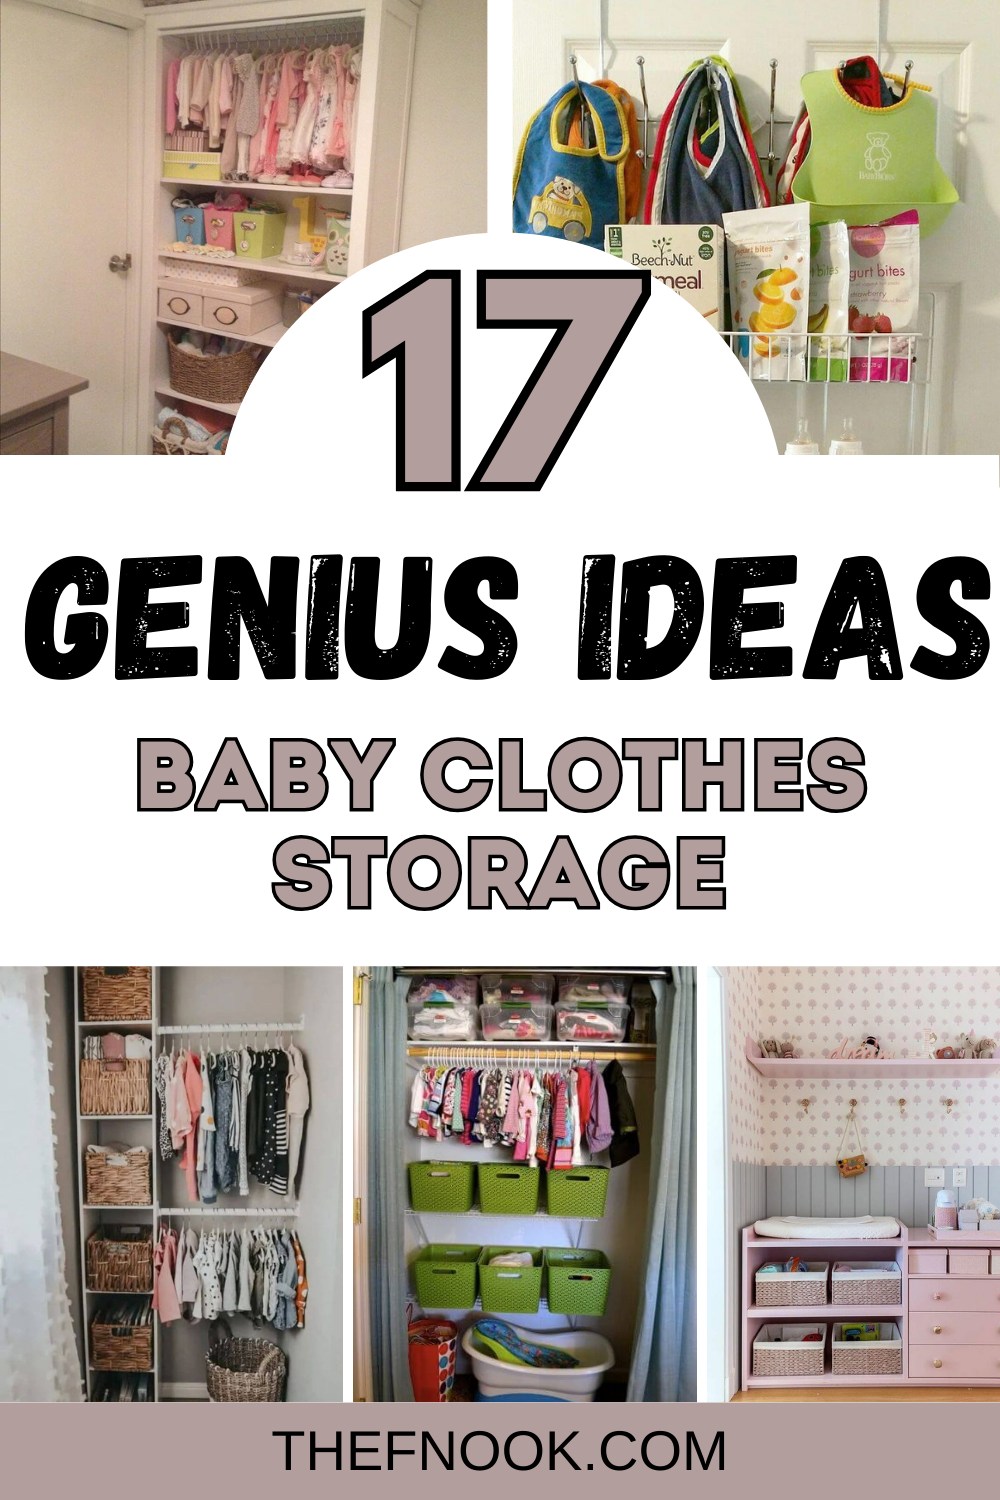 17 Genius Ideas to store baby clothes the eficient way